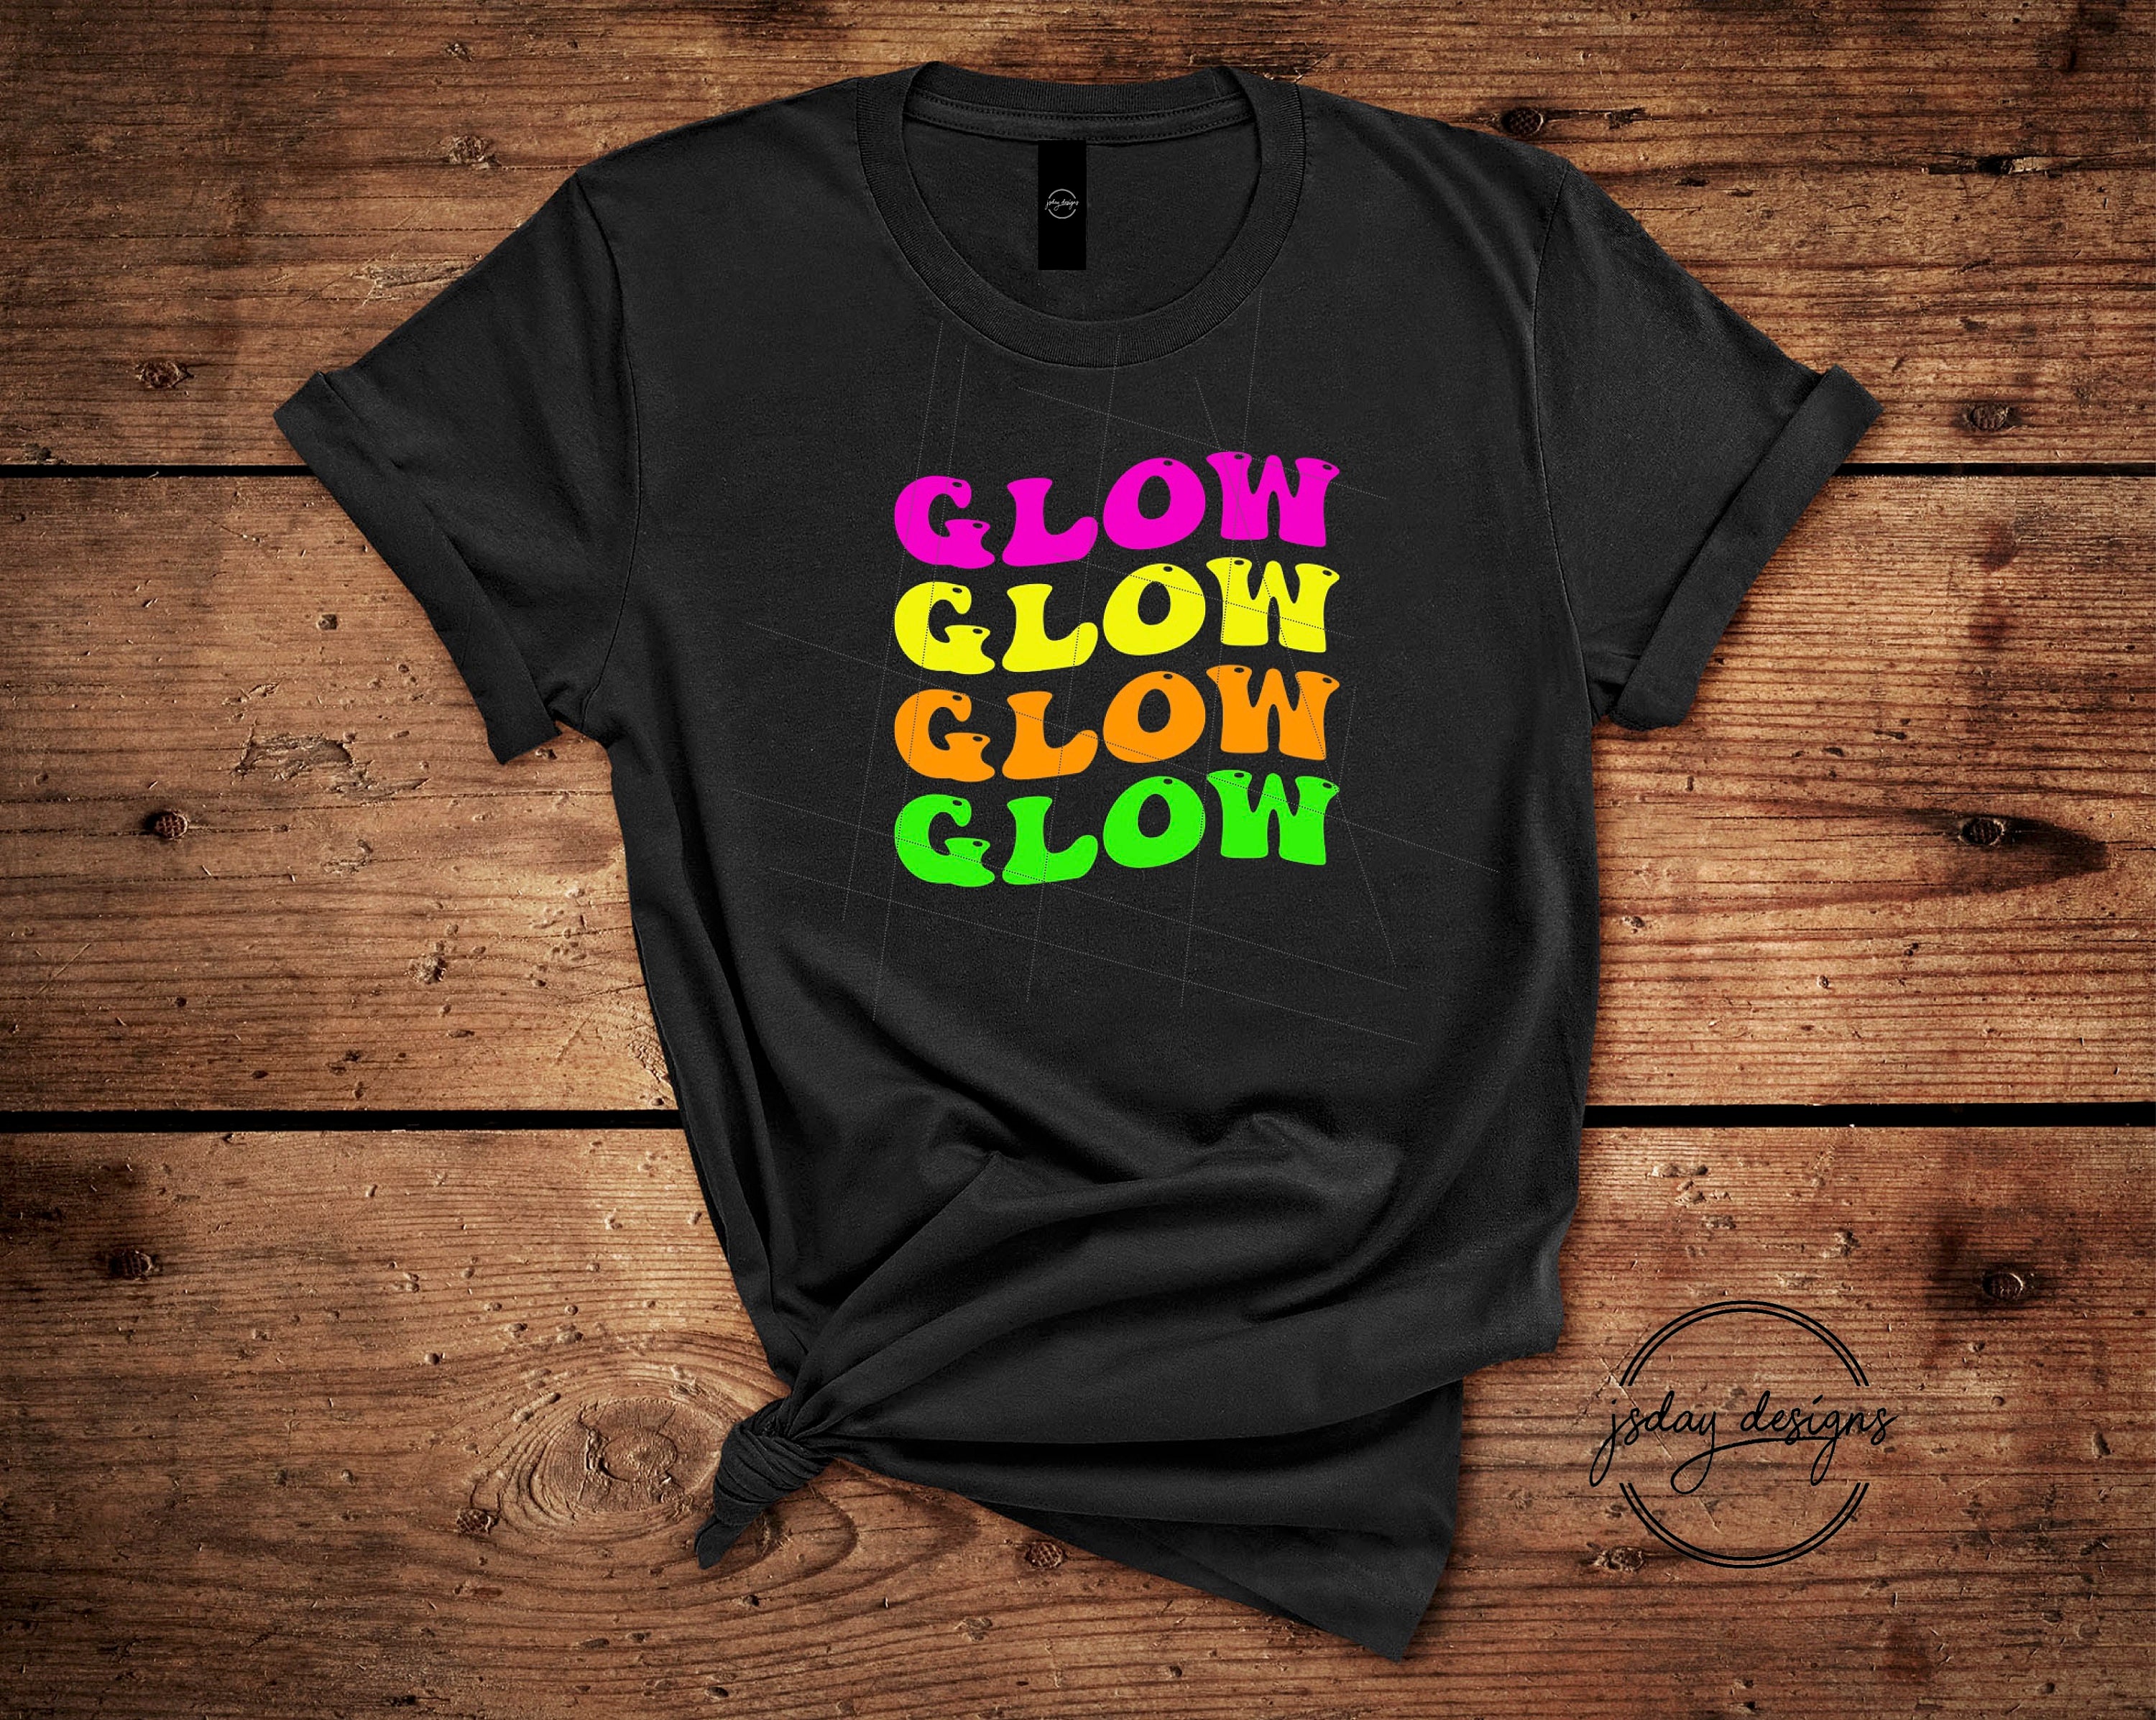 SOUND ACTIVATED HEART LED SHIRT